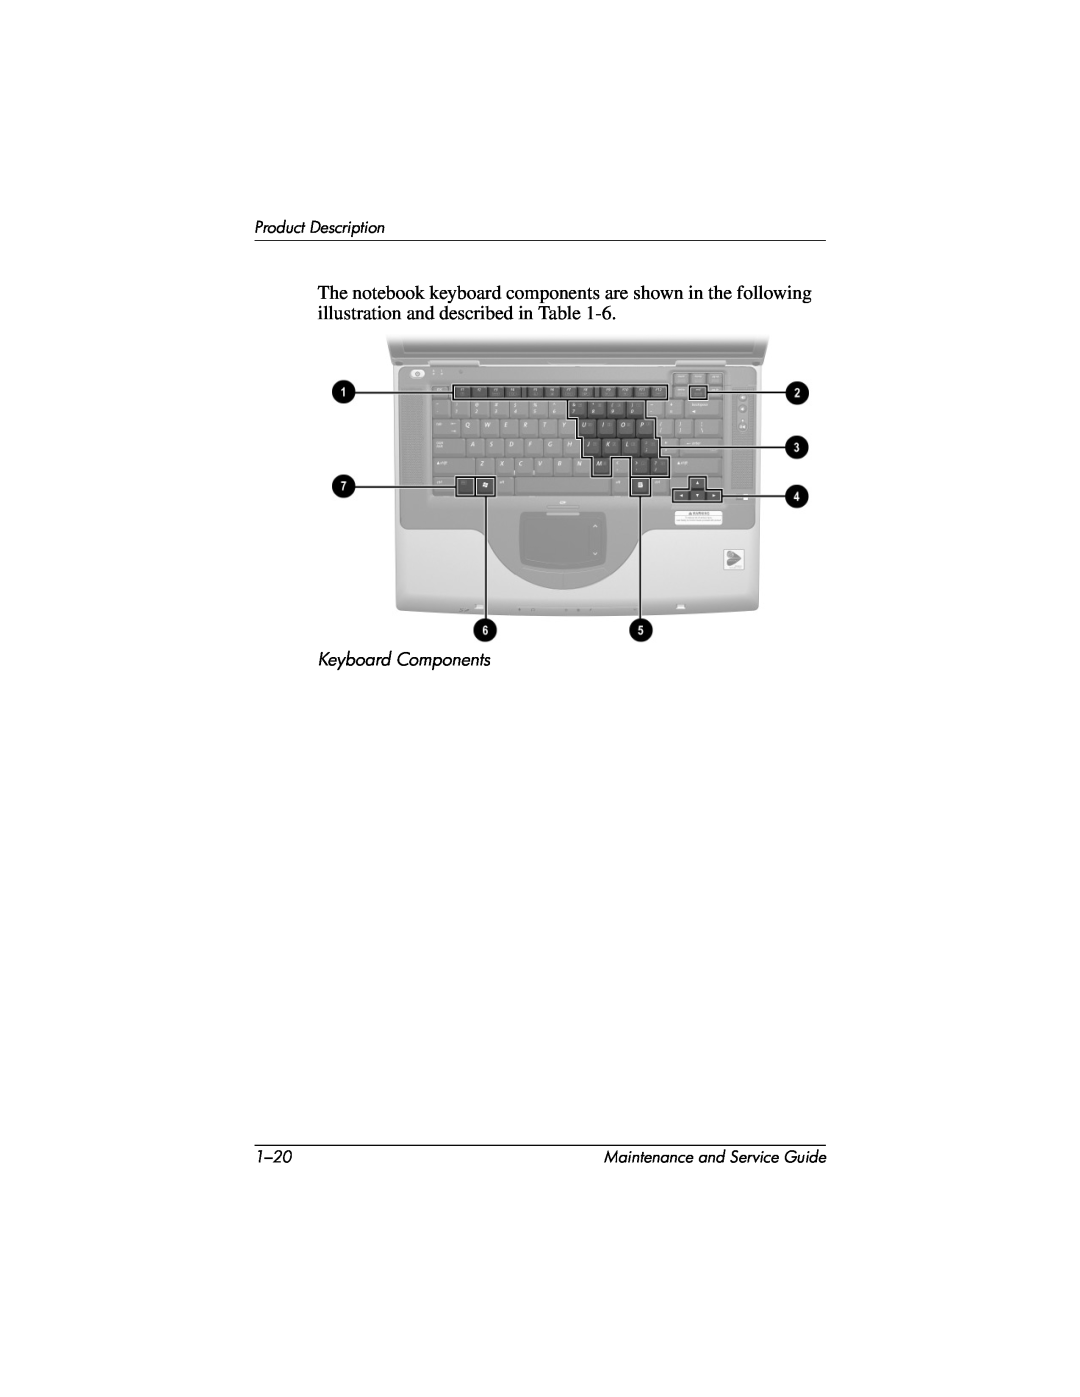 HP X1000, nx7000 manual Keyboard Components, Product Description, 1-20, Maintenance and Service Guide 